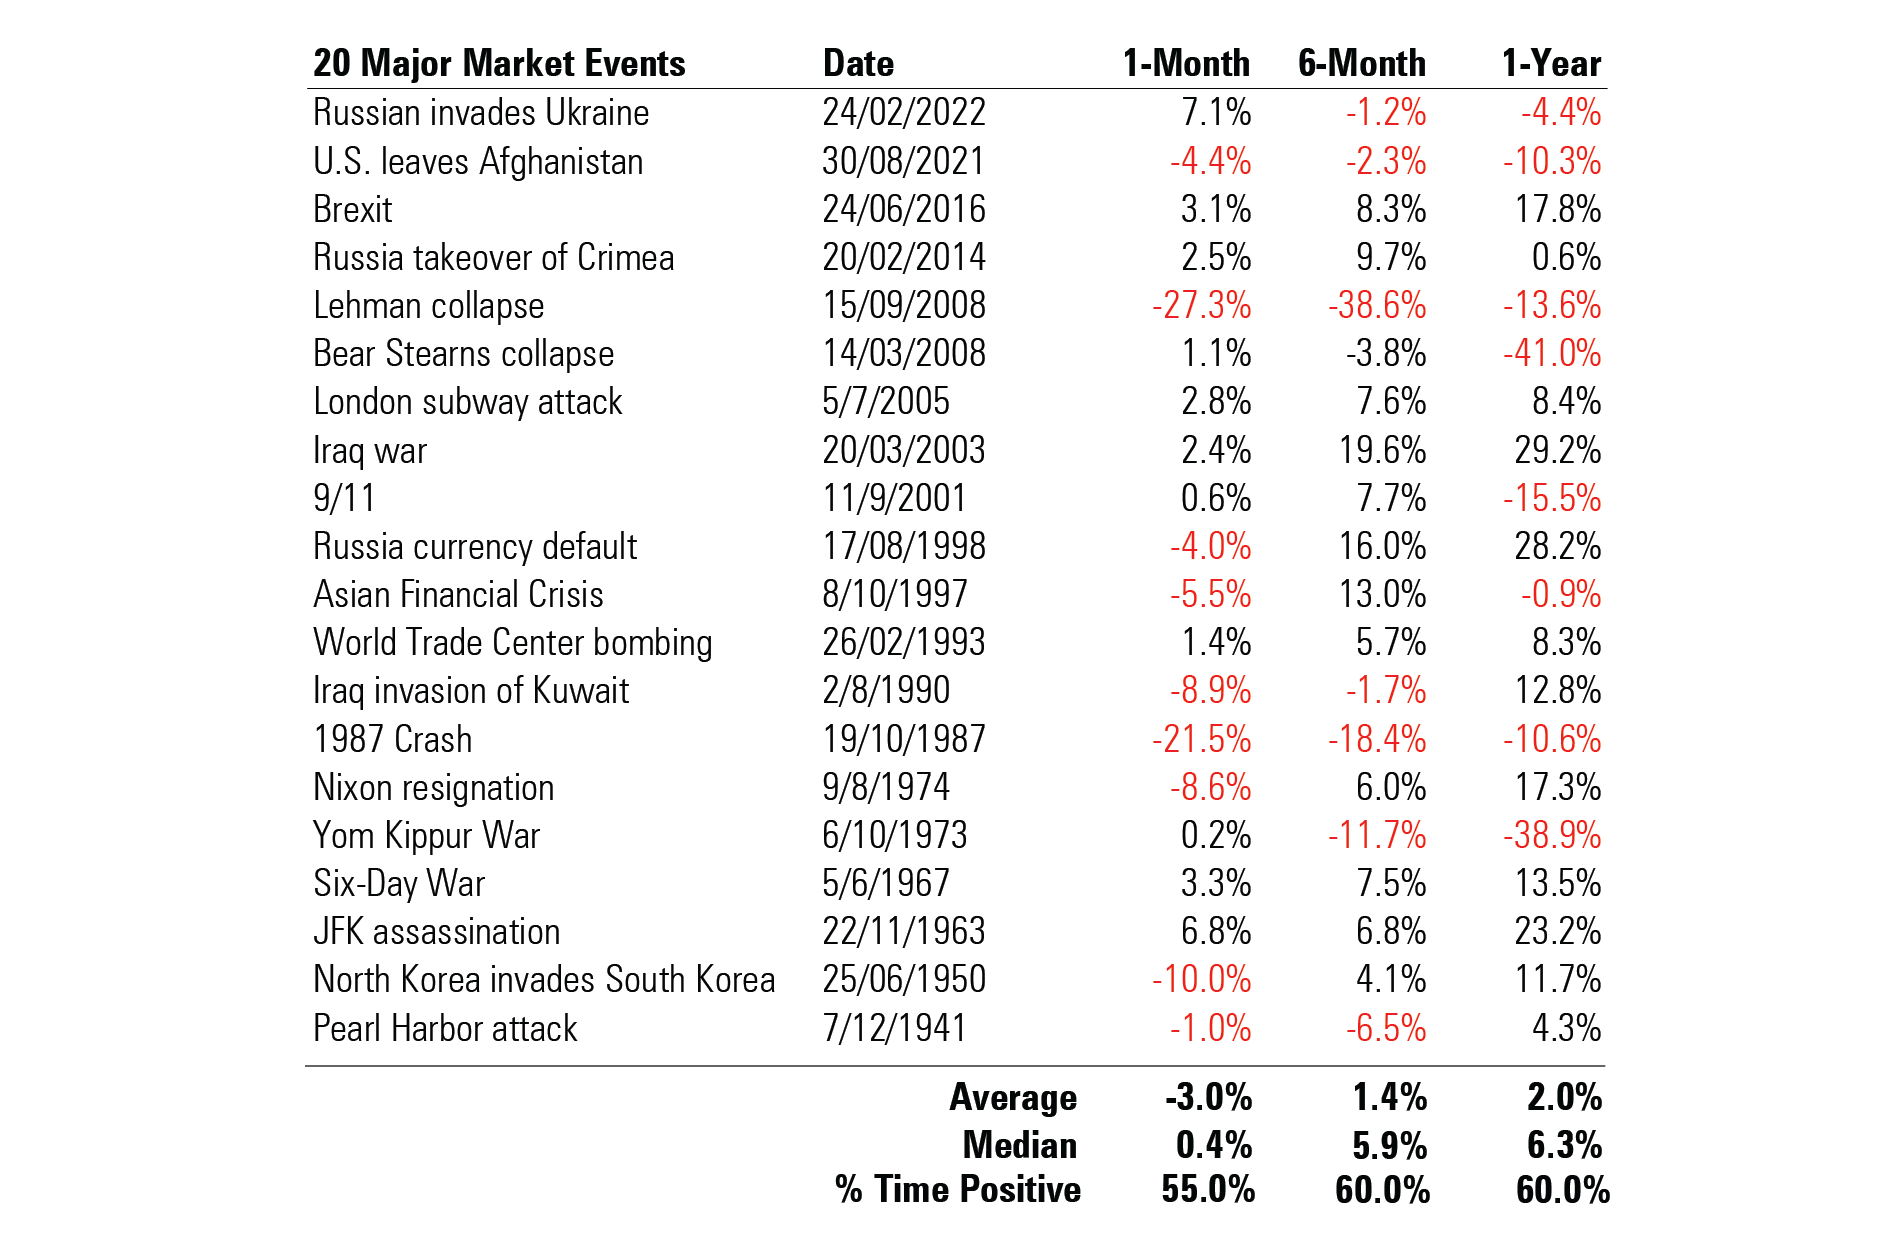 Table listing 20 major market events and the corresponding 1-month, 6-month, and 1-year equity returns.